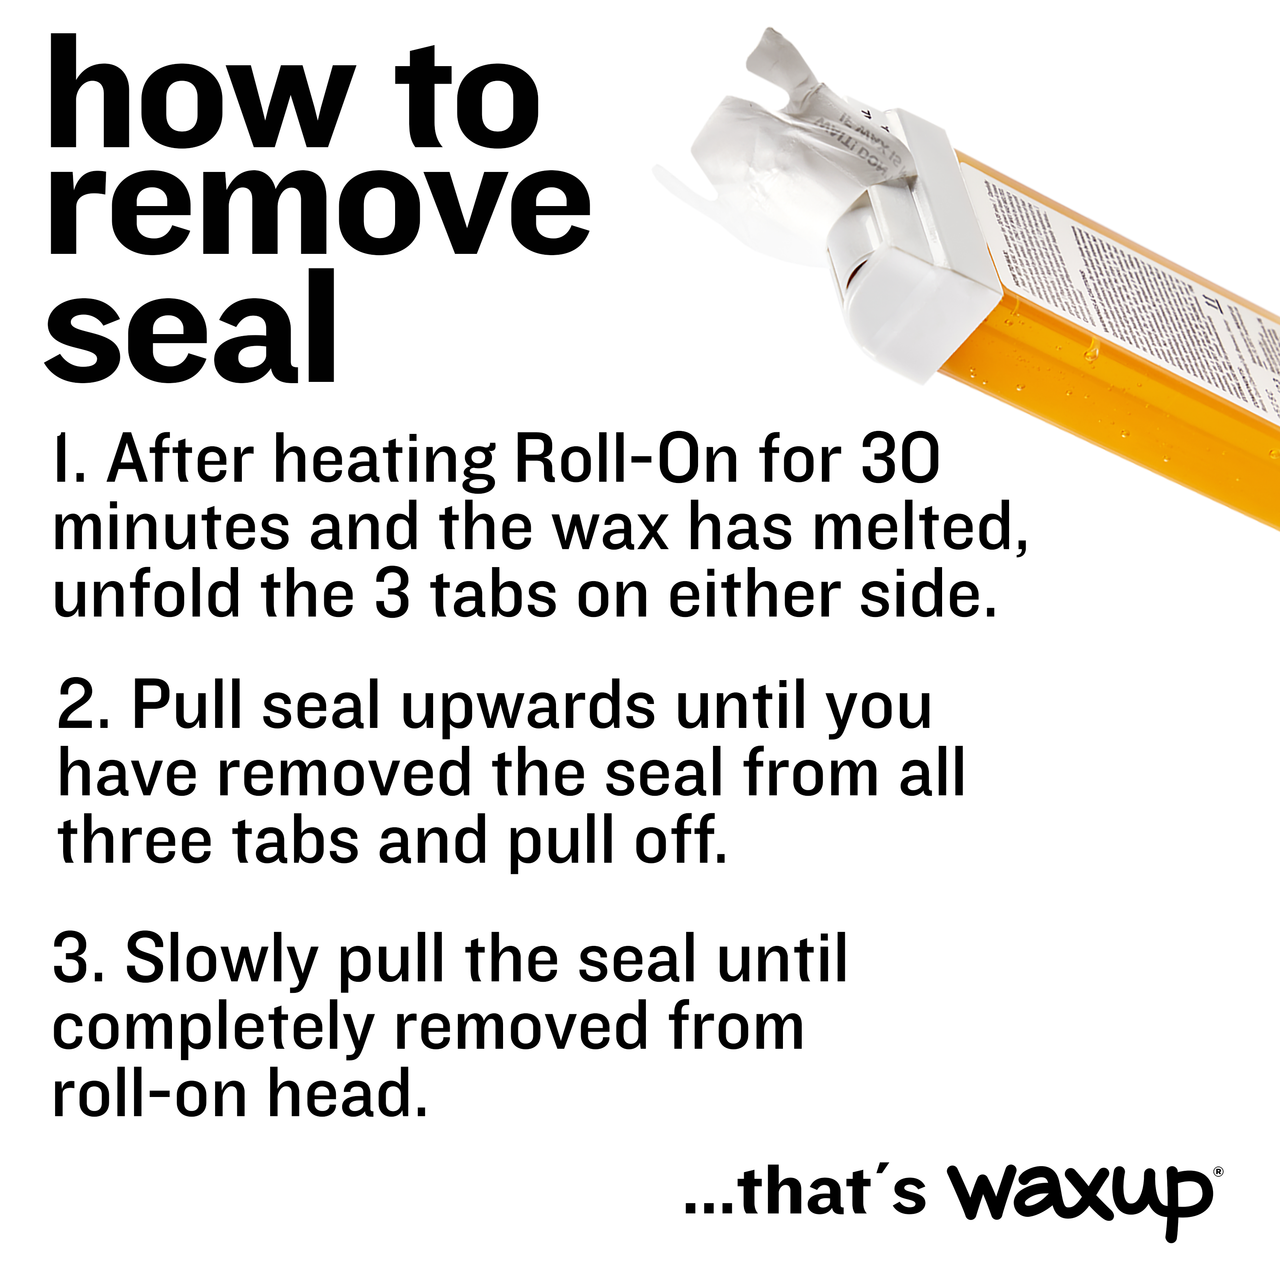 Honey Roll On Wax Cartridges Case of 50 - thatswaxup -  -  - waxup hair removal wax body waxing kit women and men professional waxing supplies